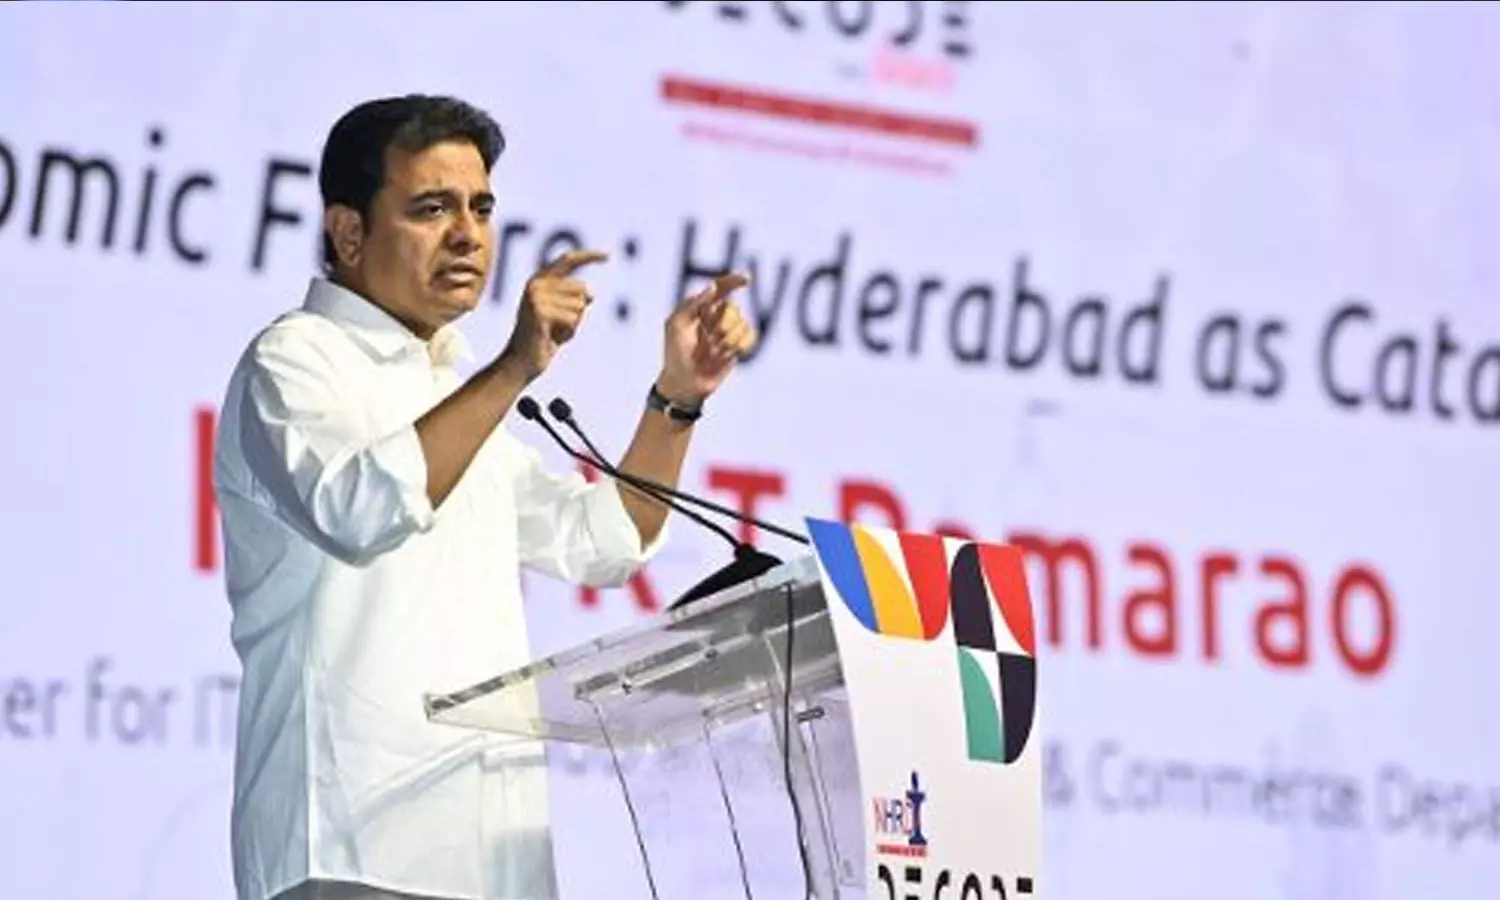 India would have been talking about 15-trillion-dollar, if it’s led by KCR, says KTR